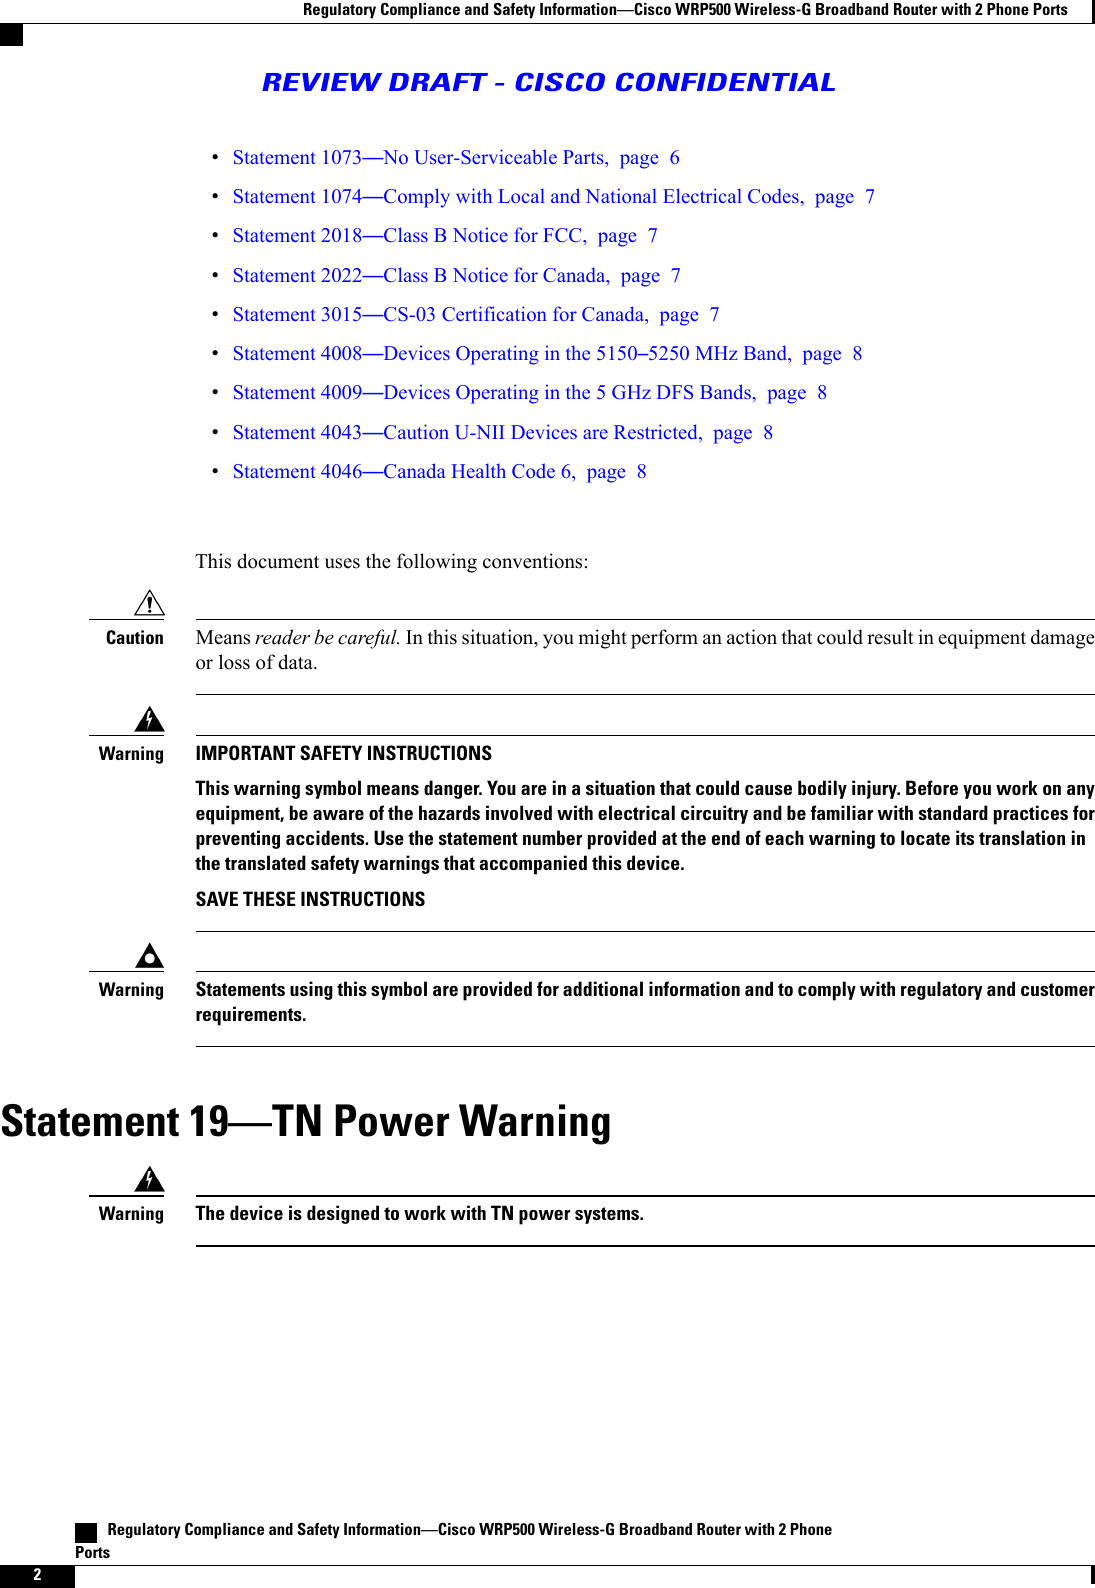 Statement 1073No User-Serviceable Parts, page 6Statement 1074Comply with Local and National Electrical Codes, page 7Statement 2018Class B Notice for FCC, page 7Statement 2022Class B Notice for Canada, page 7Statement 3015CS-03 Certification for Canada, page 7Statement 4008Devices Operating in the 51505250 MHz Band, page 8Statement 4009Devices Operating in the 5 GHz DFS Bands, page 8Statement 4043Caution U-NII Devices are Restricted, page 8Statement 4046Canada Health Code 6, page 8This document uses the following conventions:Means reader be careful. In this situation, you might perform an action that could result in equipment damageor loss of data.CautionIMPORTANT SAFETY INSTRUCTIONSThis warning symbol means danger. You are in a situation that could cause bodily injury. Before you work on anyequipment, be aware of the hazards involved with electrical circuitry and be familiar with standard practices forpreventing accidents. Use the statement number provided at the end of each warning to locate its translation inthe translated safety warnings that accompanied this device.SAVE THESE INSTRUCTIONSWarningStatements using this symbol are provided for additional information and to comply with regulatory and customerrequirements.WarningStatement 19TN Power WarningThe device is designed to work with TN power systems.Warning   Regulatory Compliance and Safety InformationCisco WRP500 Wireless-G Broadband Router with 2 PhonePorts2Regulatory Compliance and Safety InformationCisco WRP500 Wireless-G Broadband Router with 2 Phone PortsREVIEW DRAFT - CISCO CONFIDENTIAL